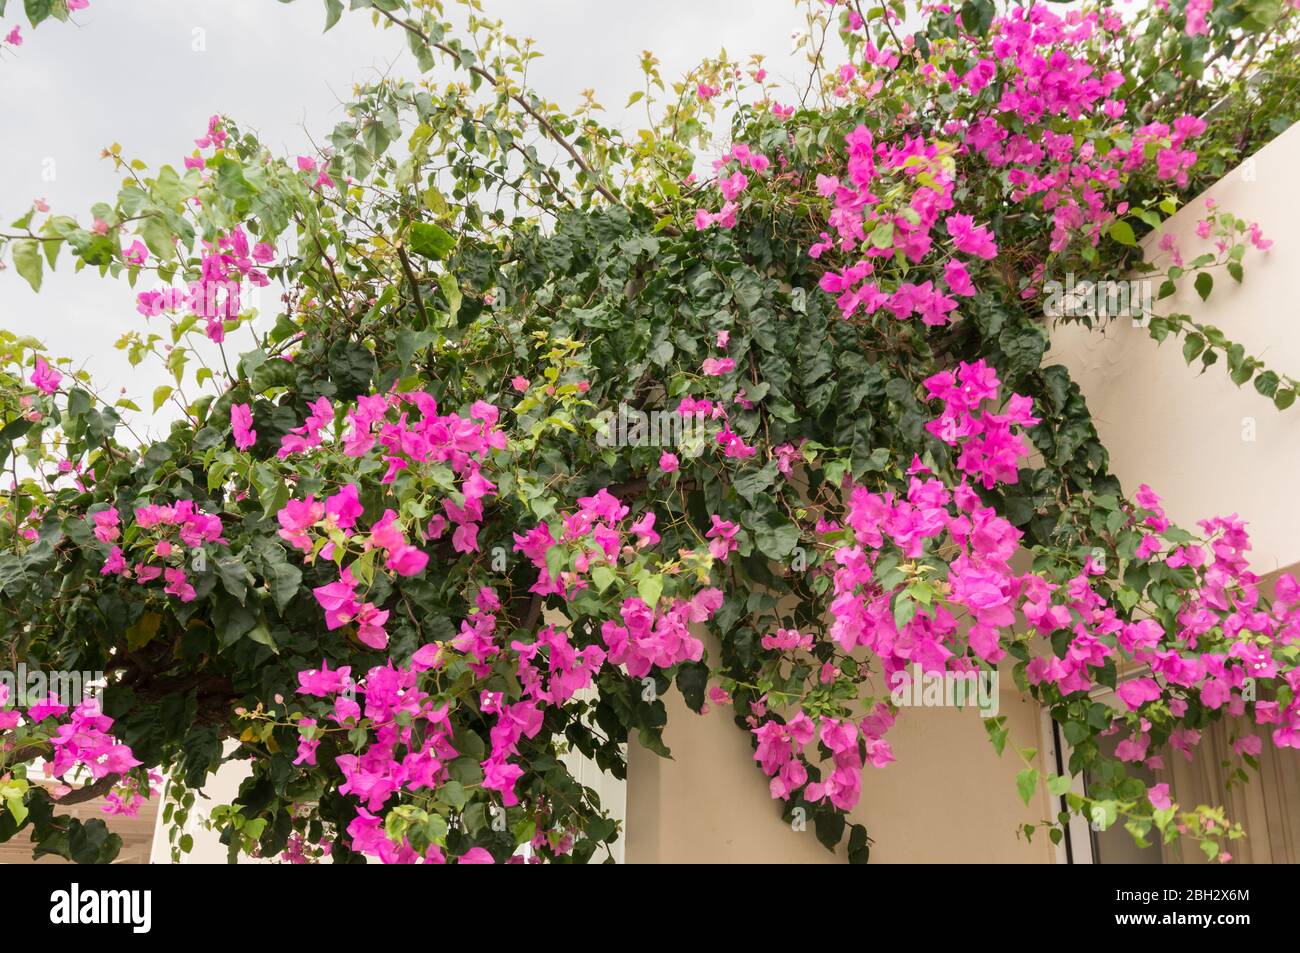 Luxurious pink bougainvillea flowers adorn the balcony of the house. Soft Focus Stock Photo